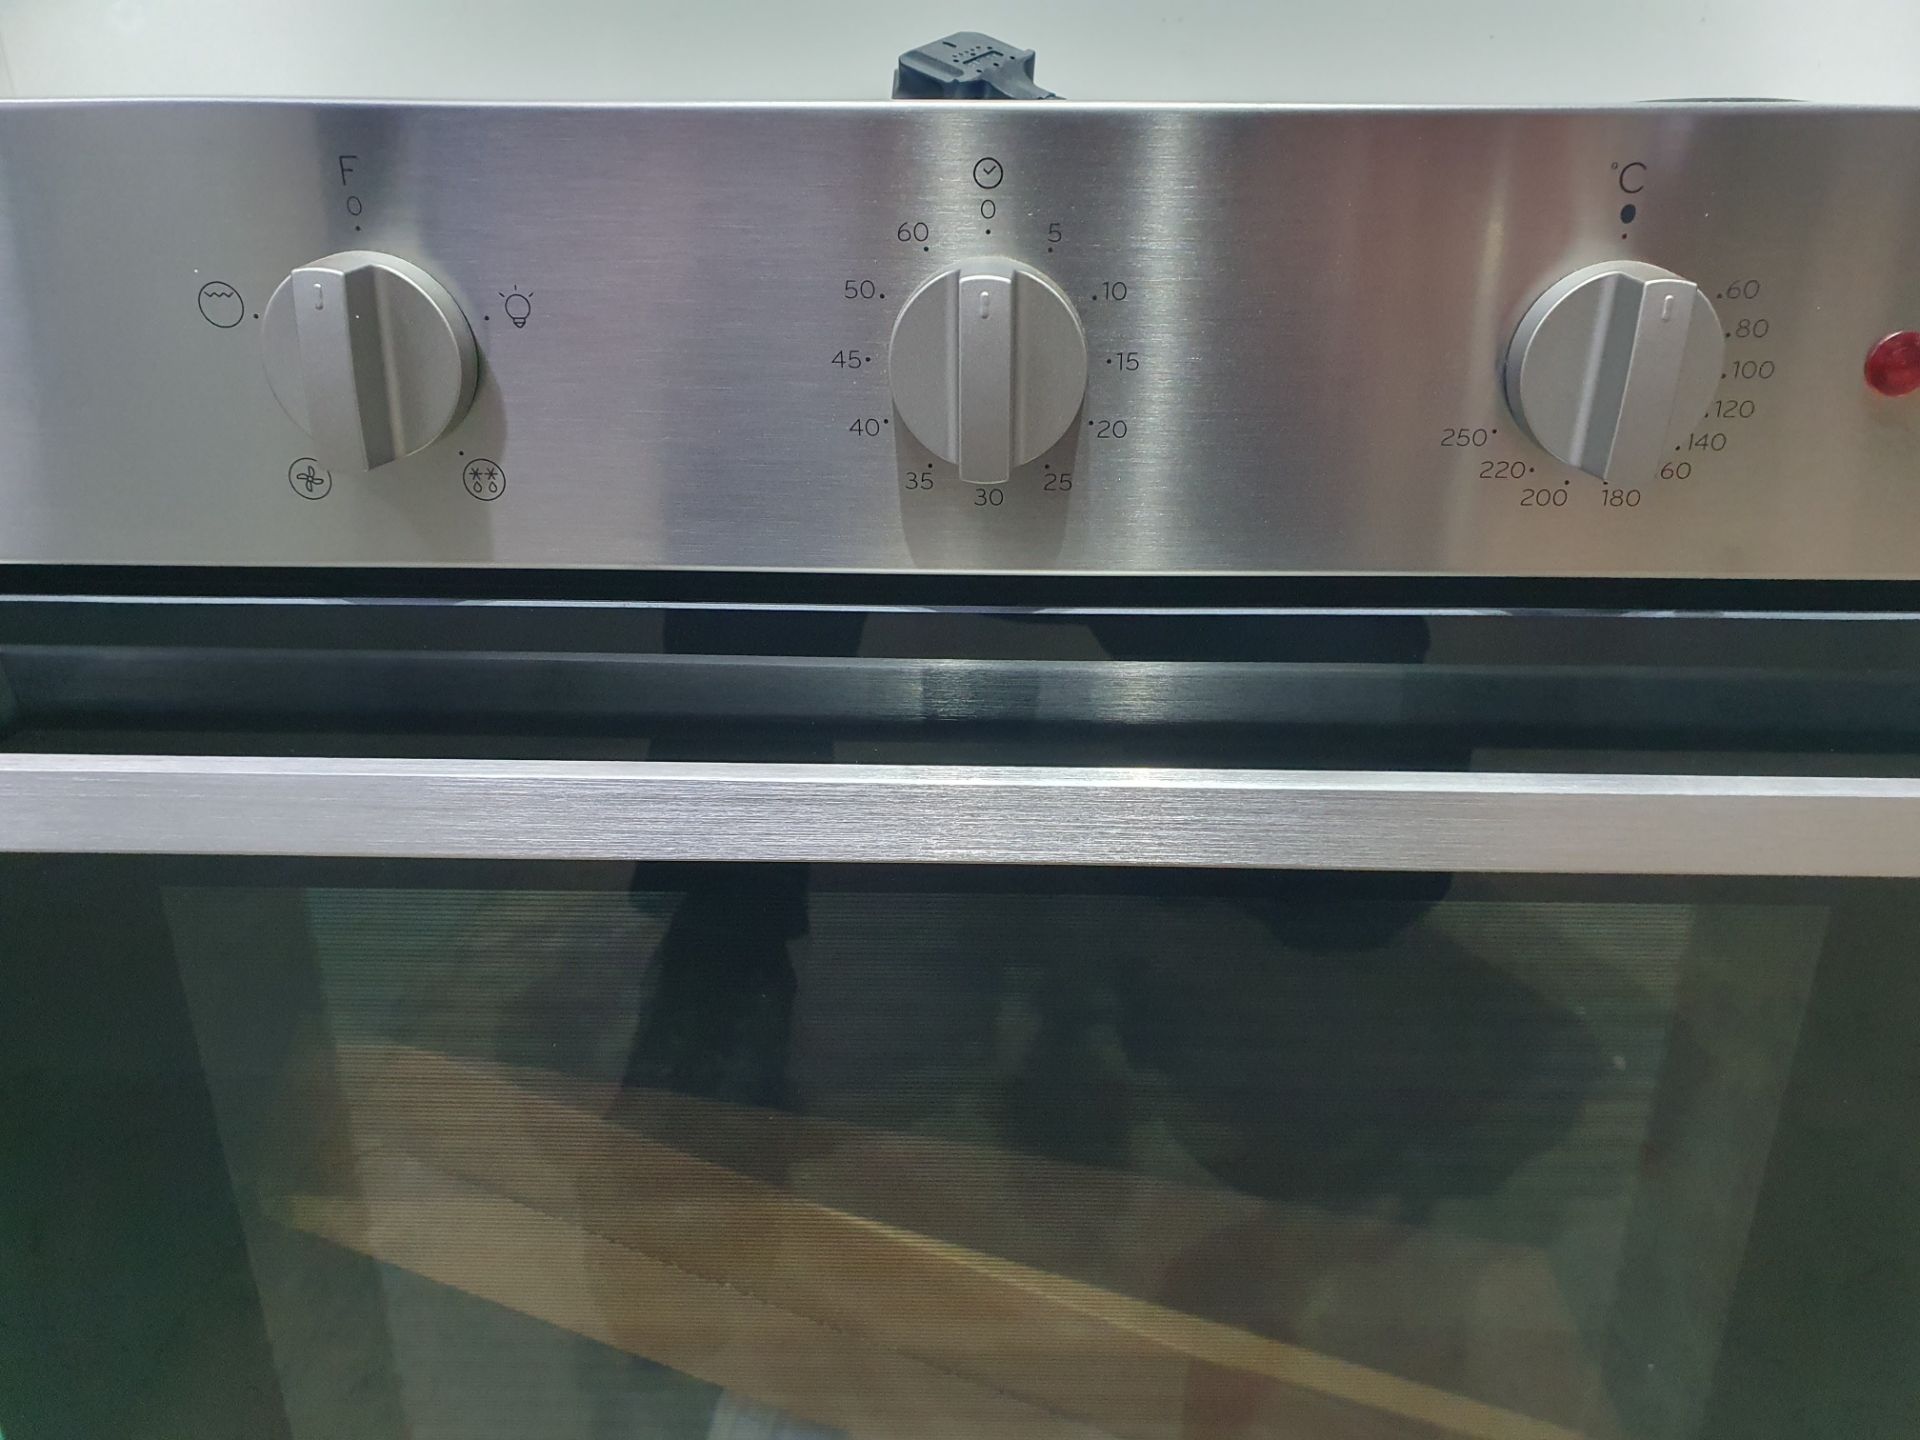 Ex-Display Indesit IFW 6330 IX UK Built-In Electric Single Oven - Stainless Steel - Image 2 of 7